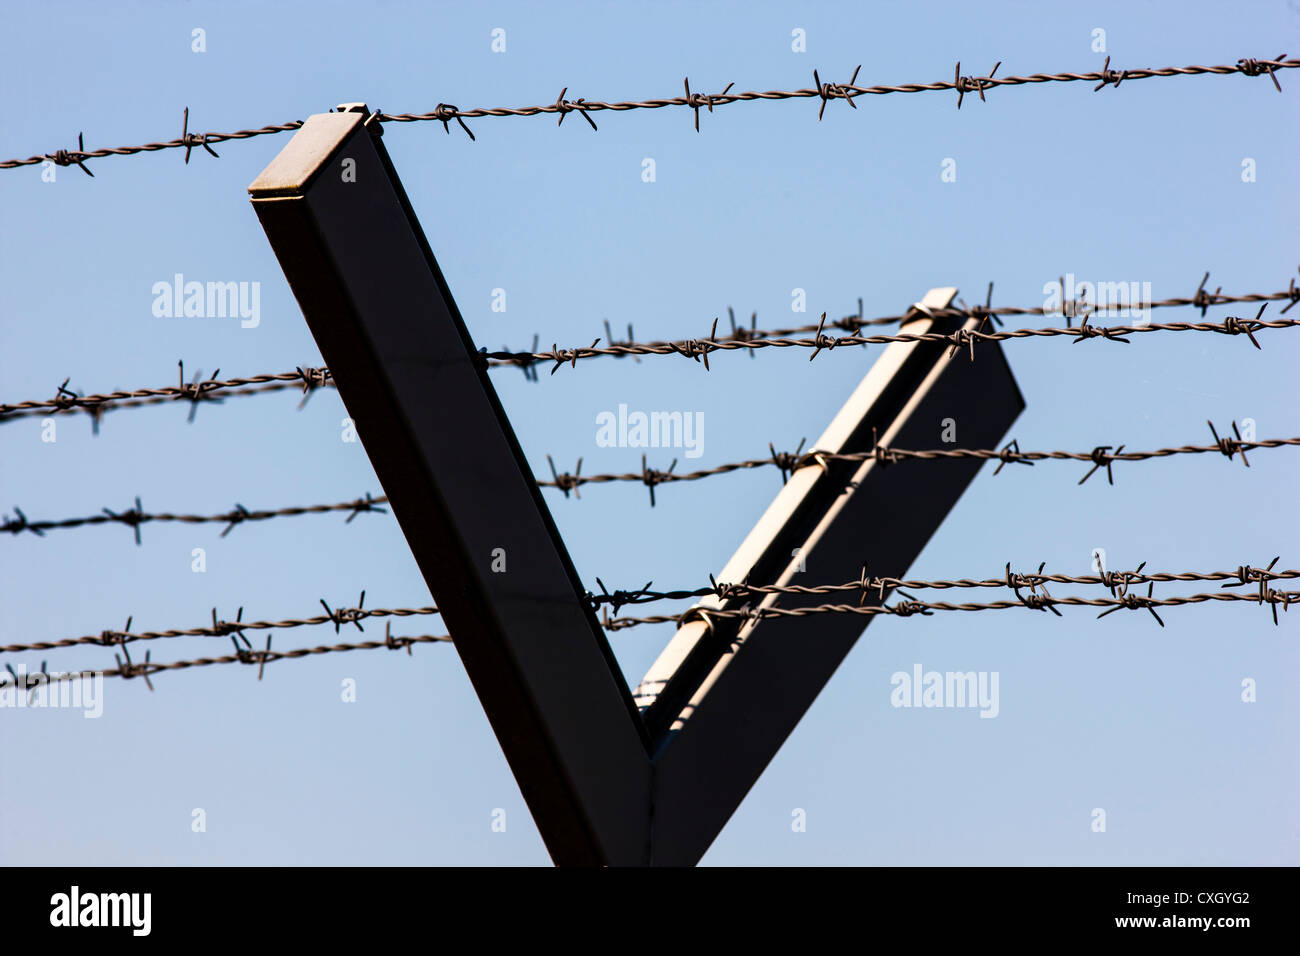 Barbed wire, to protected an area. Iron, metal fence with razor wire on top. Stock Photo